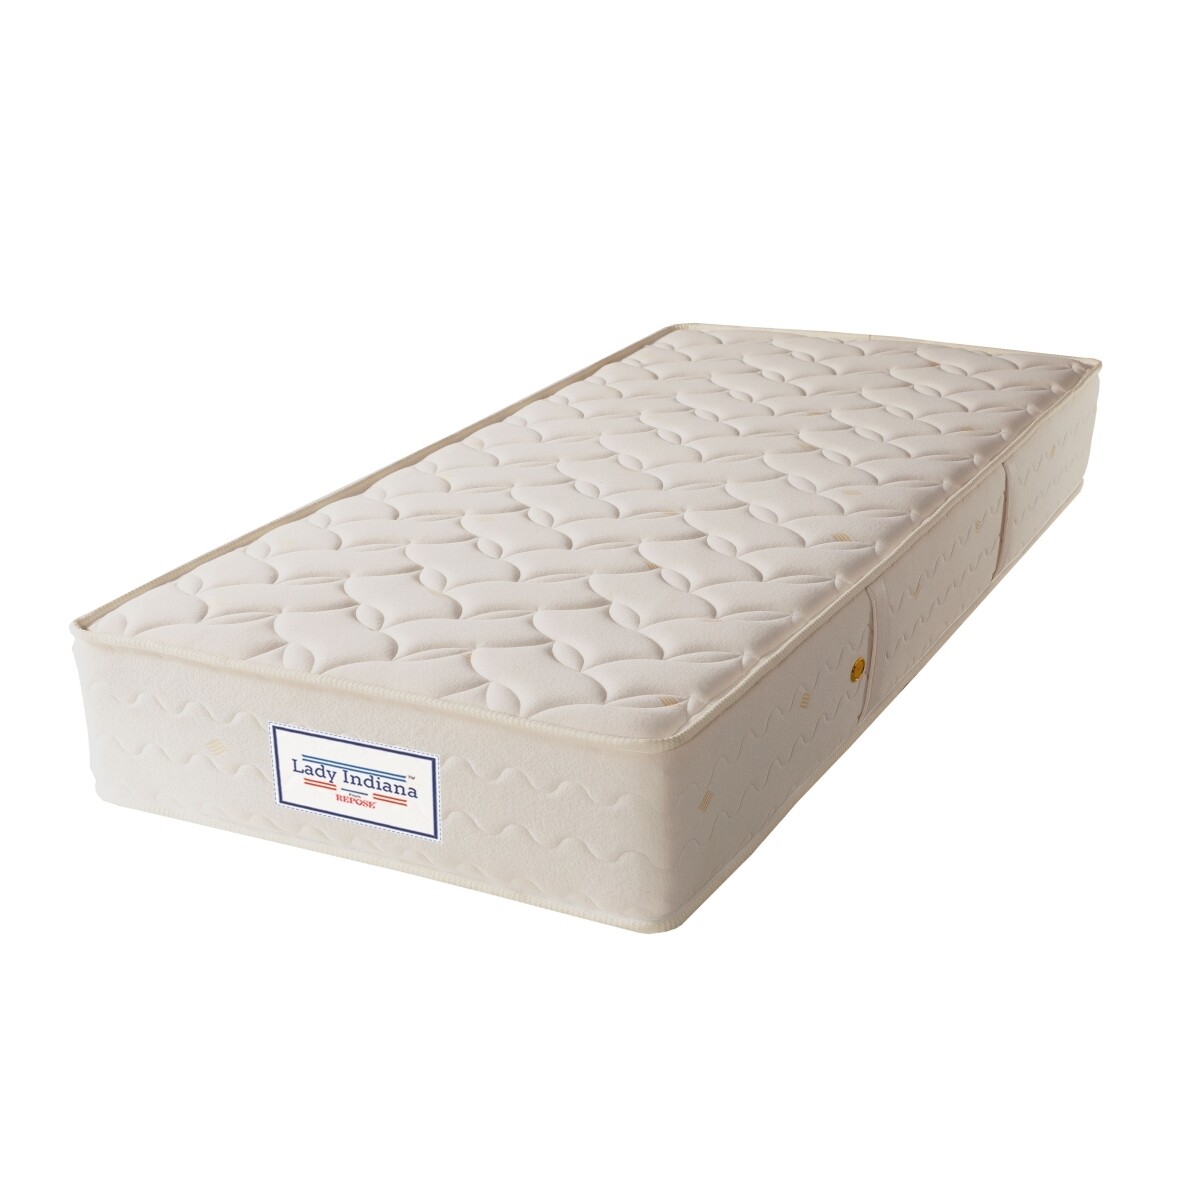 Kids Single Bed Pocketed Spring Mattress - Cream - 6" thickness